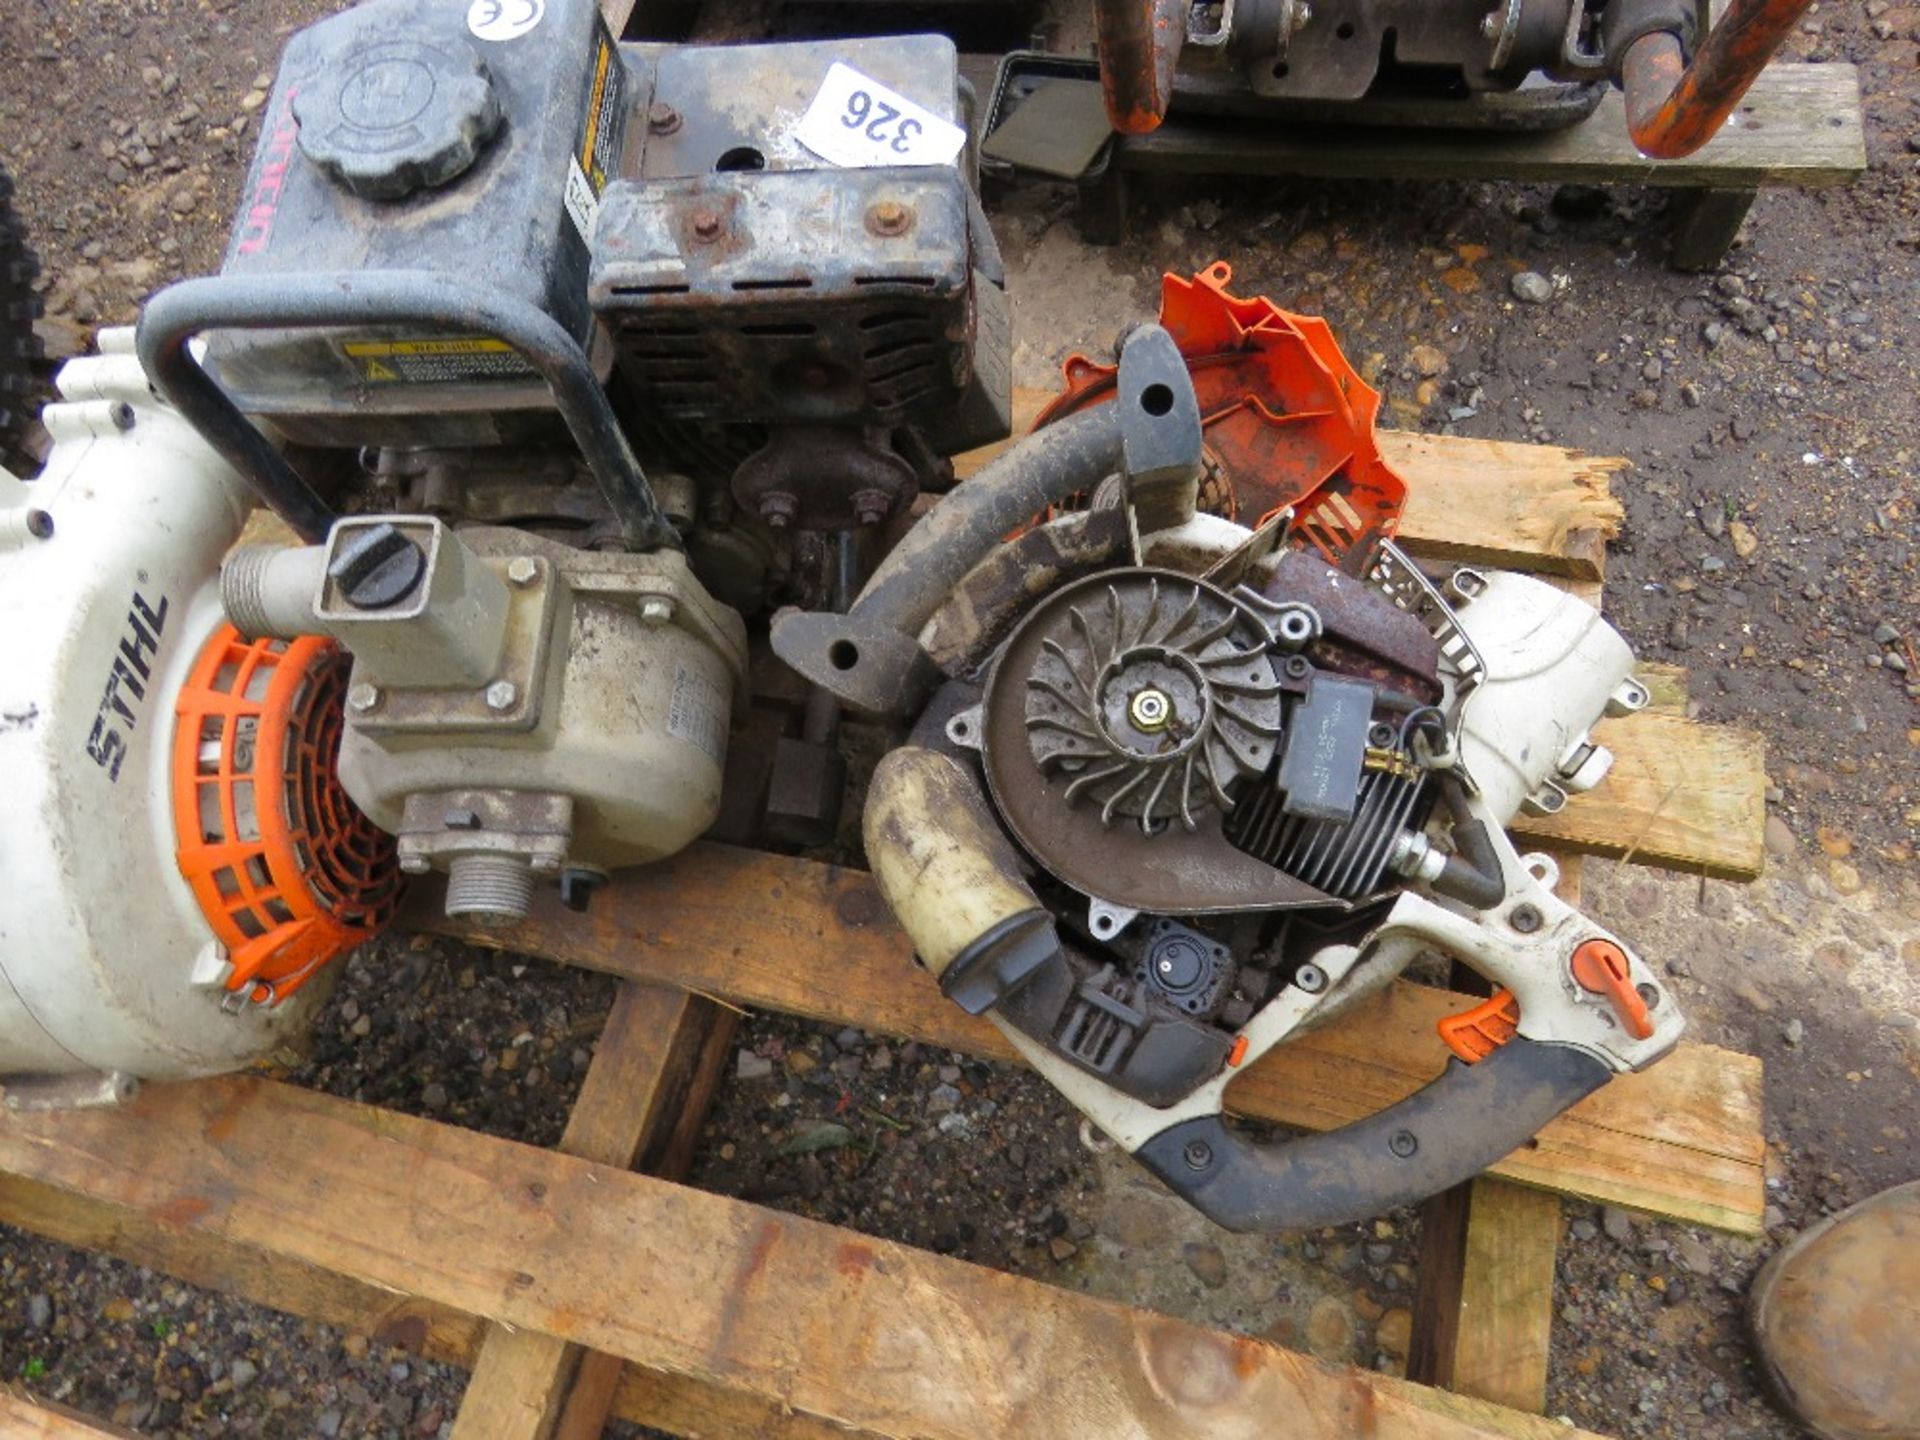 2 X STIHL HAND HELD BLOWERS PLUS A WATER PUMP, PARTS MISSING. THIS LOT IS SOLD UNDER THE AUCTIONE